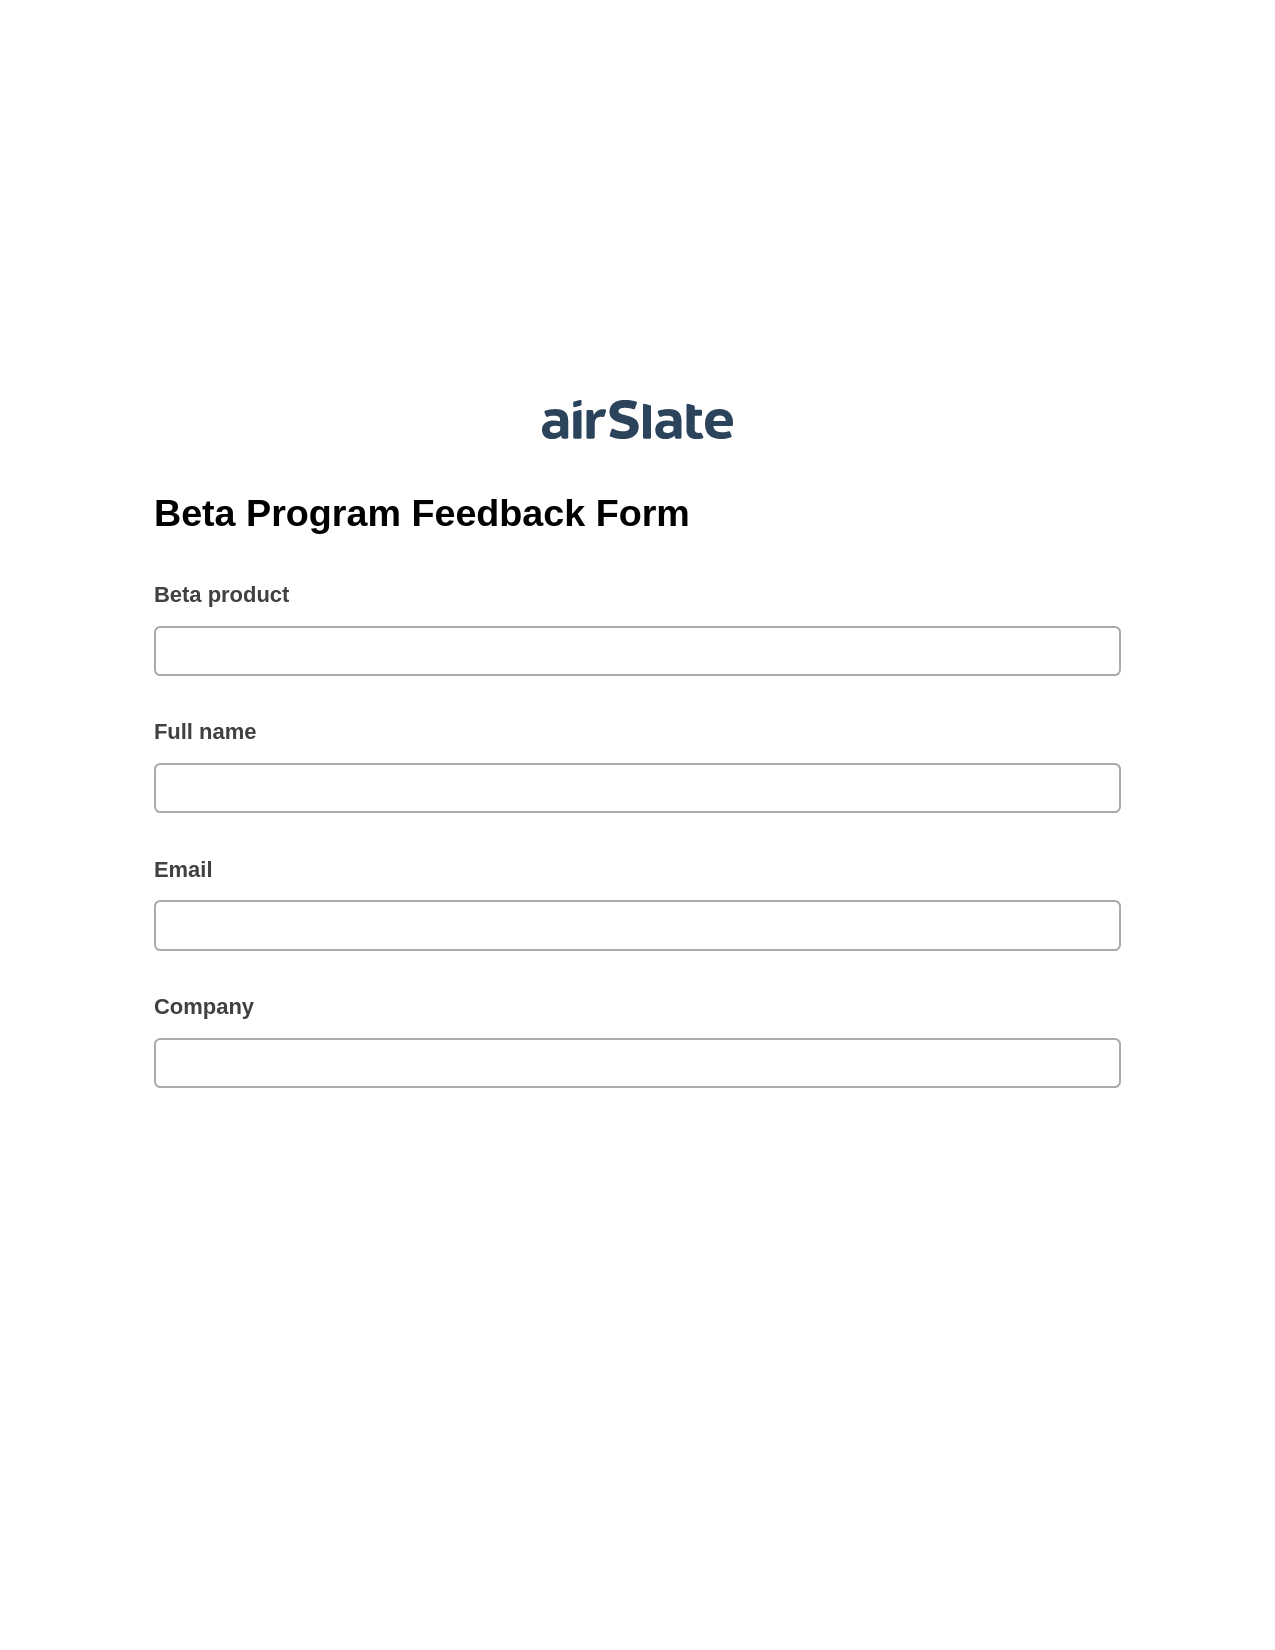 Beta Program Feedback Form Pre-fill from MySQL Bot, Create slate addon, Export to Formstack Documents Bot